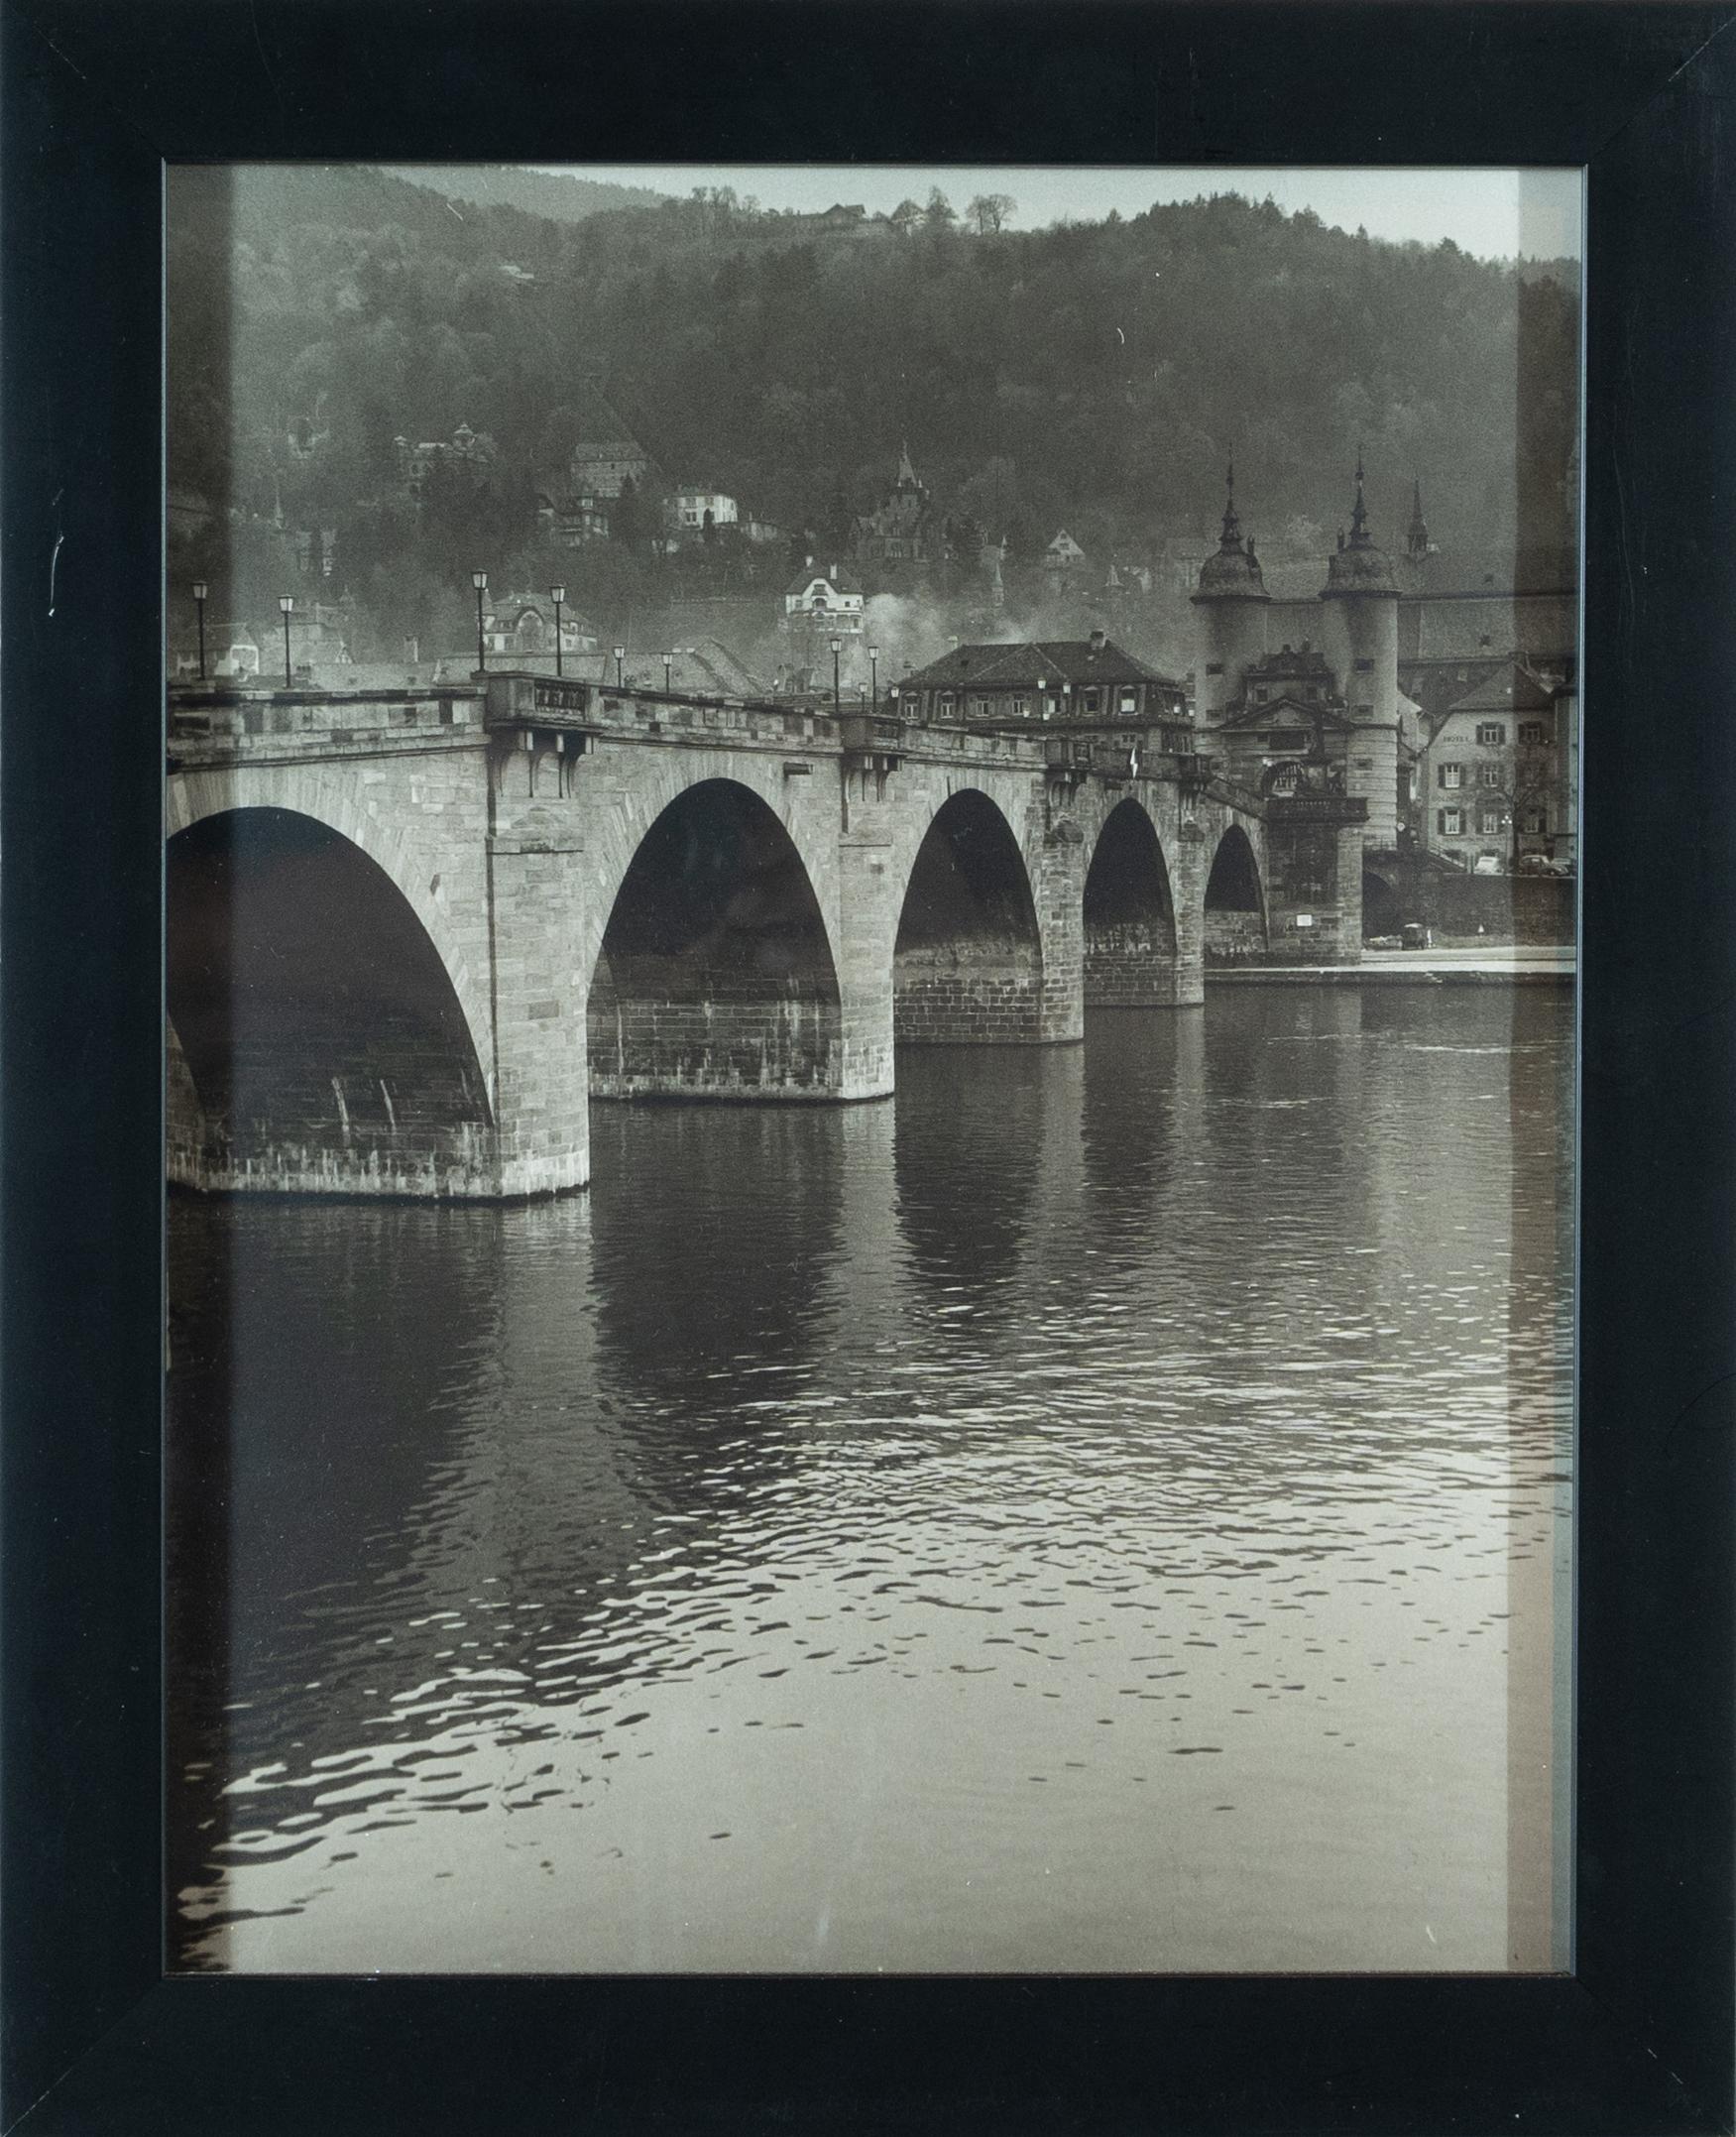 This 20" x 16" framed black and white photographic print depicts a European bridge, river and landscape. The bridge disappears into the left side of the canvas and leads to what appears to be a large building on the right side of the work, along the